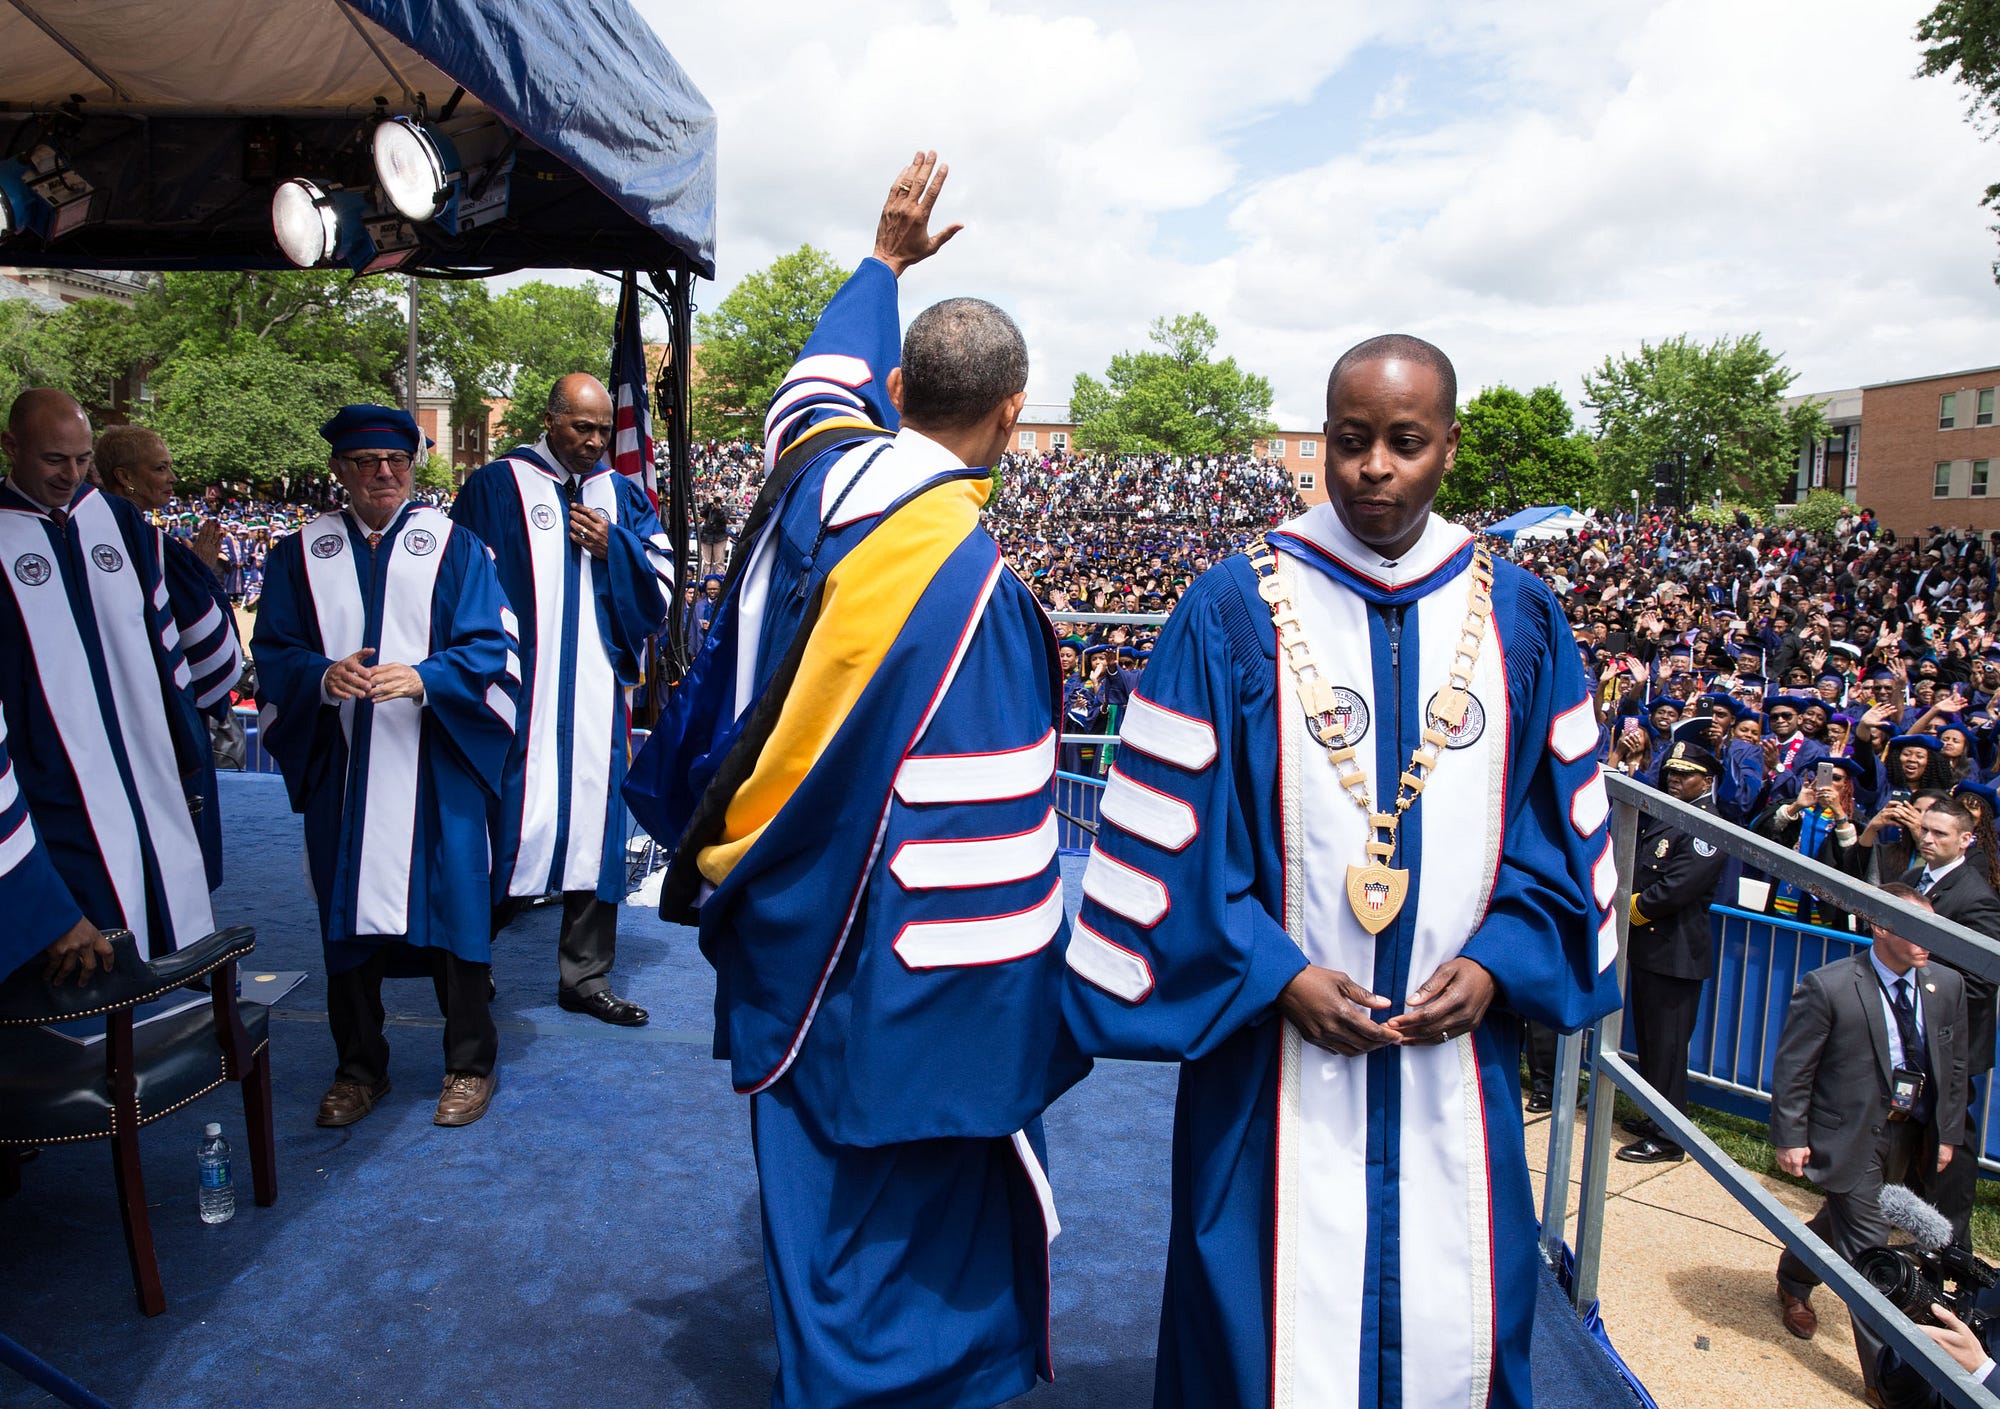 President Obama’s Commencement Address to the Howard University Class